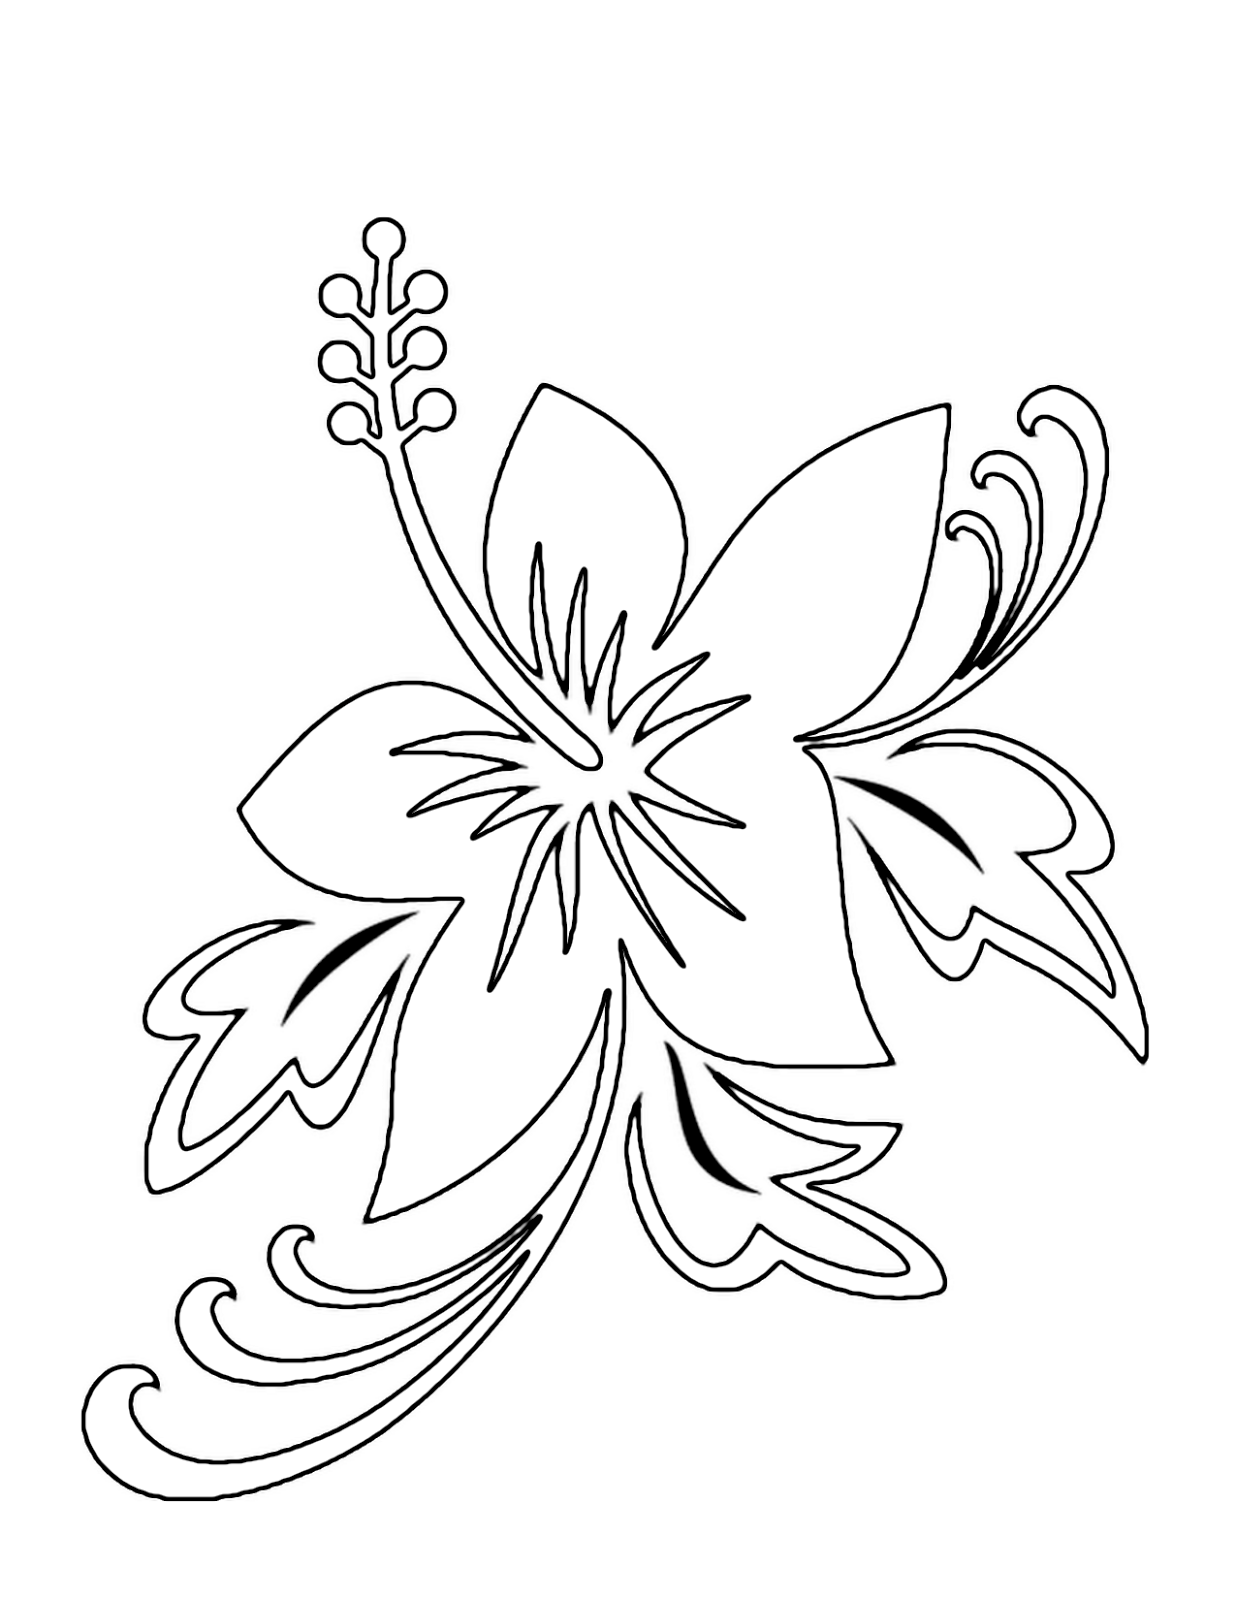 Flowers For > Hawaiian Flowers Coloring Pages